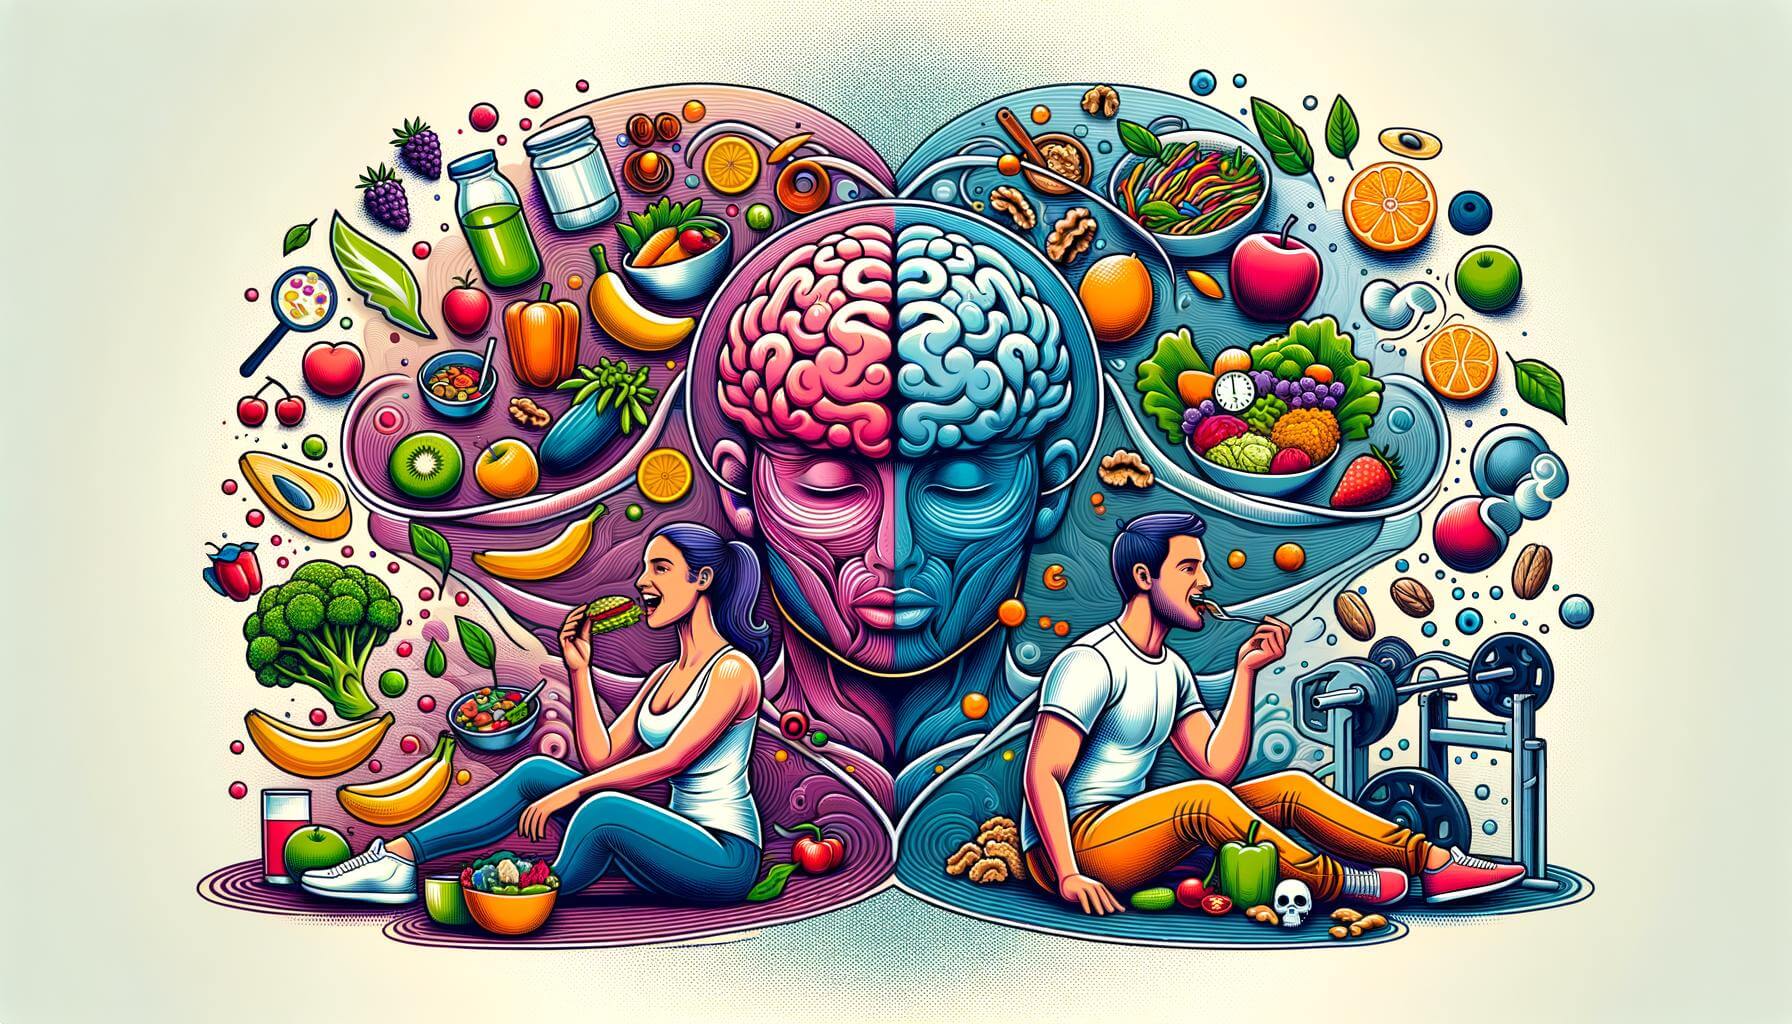 Nutrition for brain health and cognitive function